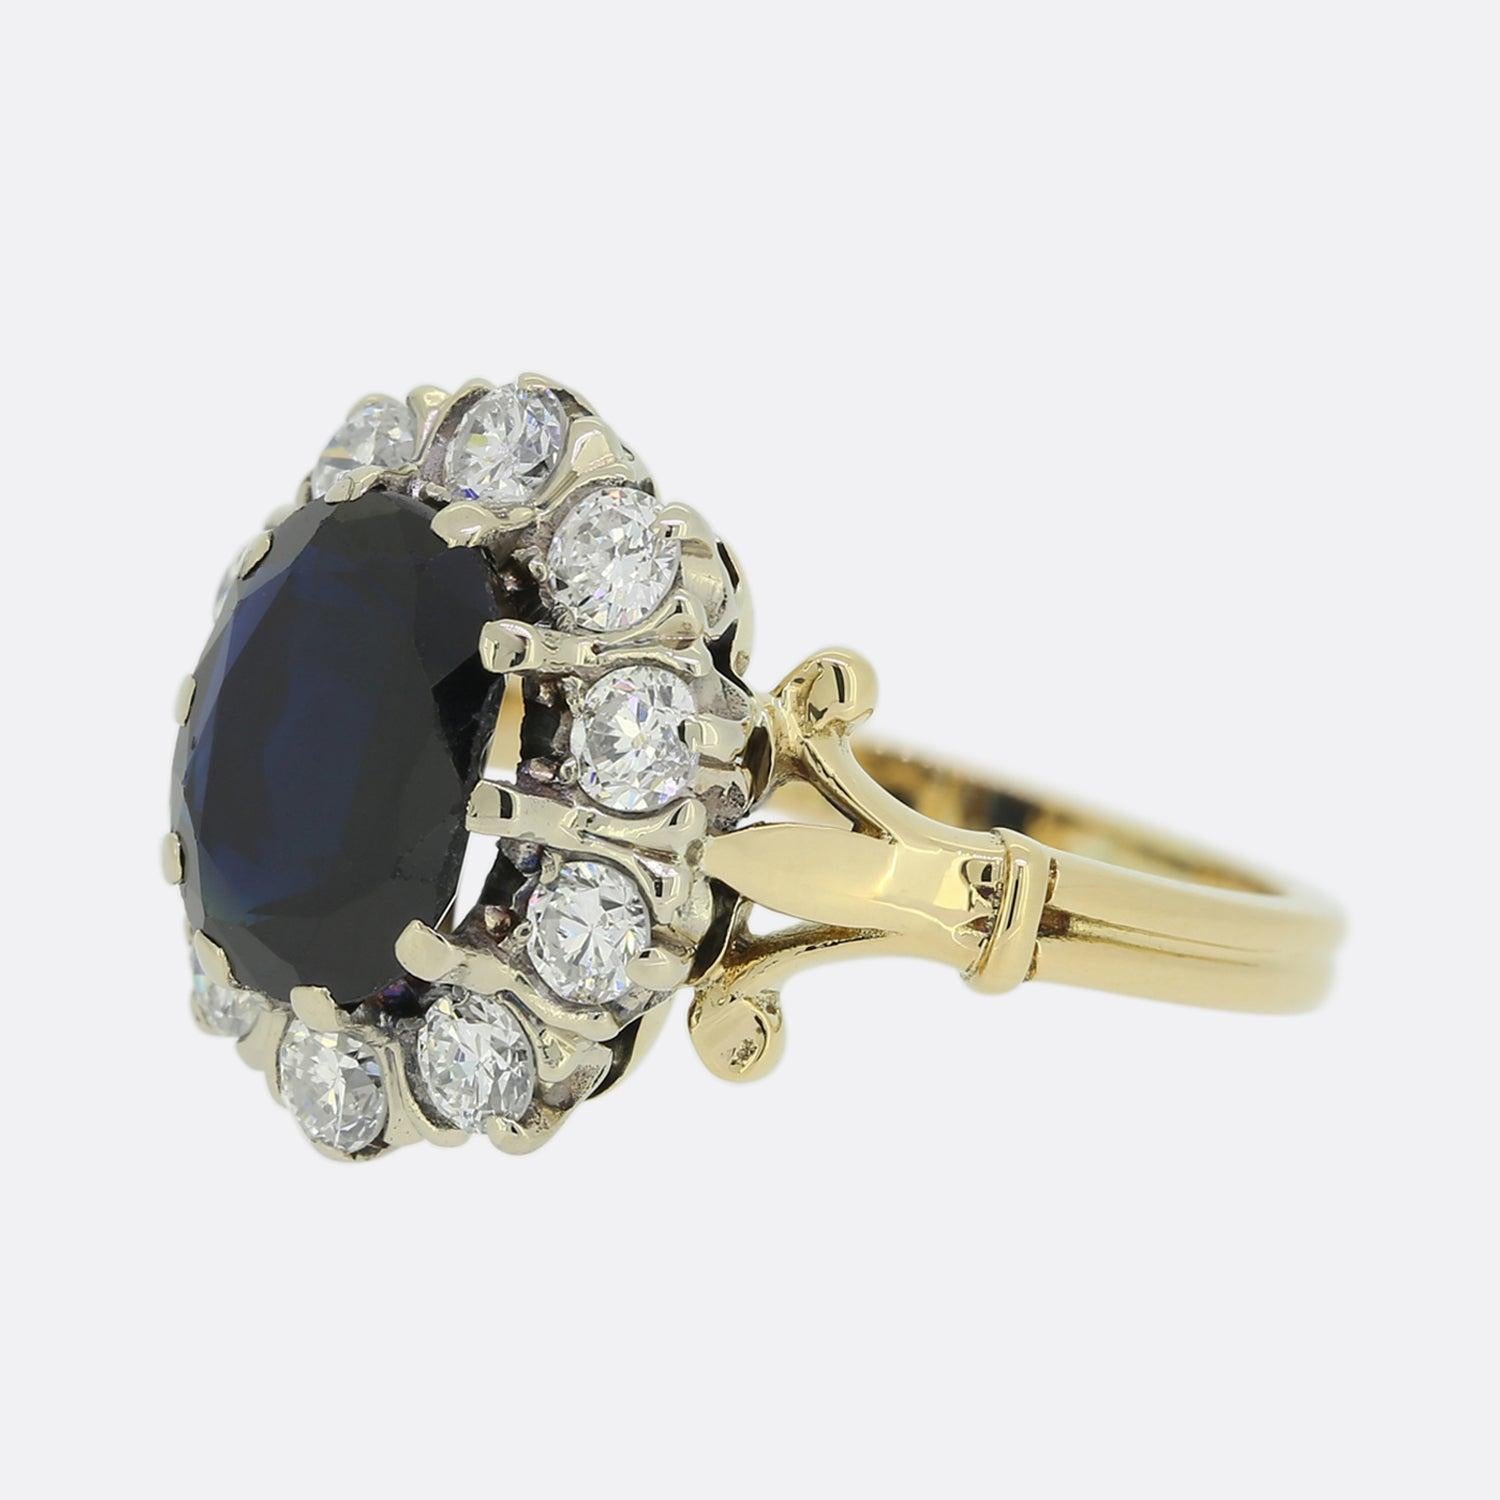 Here we have a sizeable sapphire and diamond cluster ring. At the centre of this vintage piece we find a flat, widely spread oval shaped sapphire possessing a deep royal blue colour tone. This focal stone has been set in platinum and is circulated